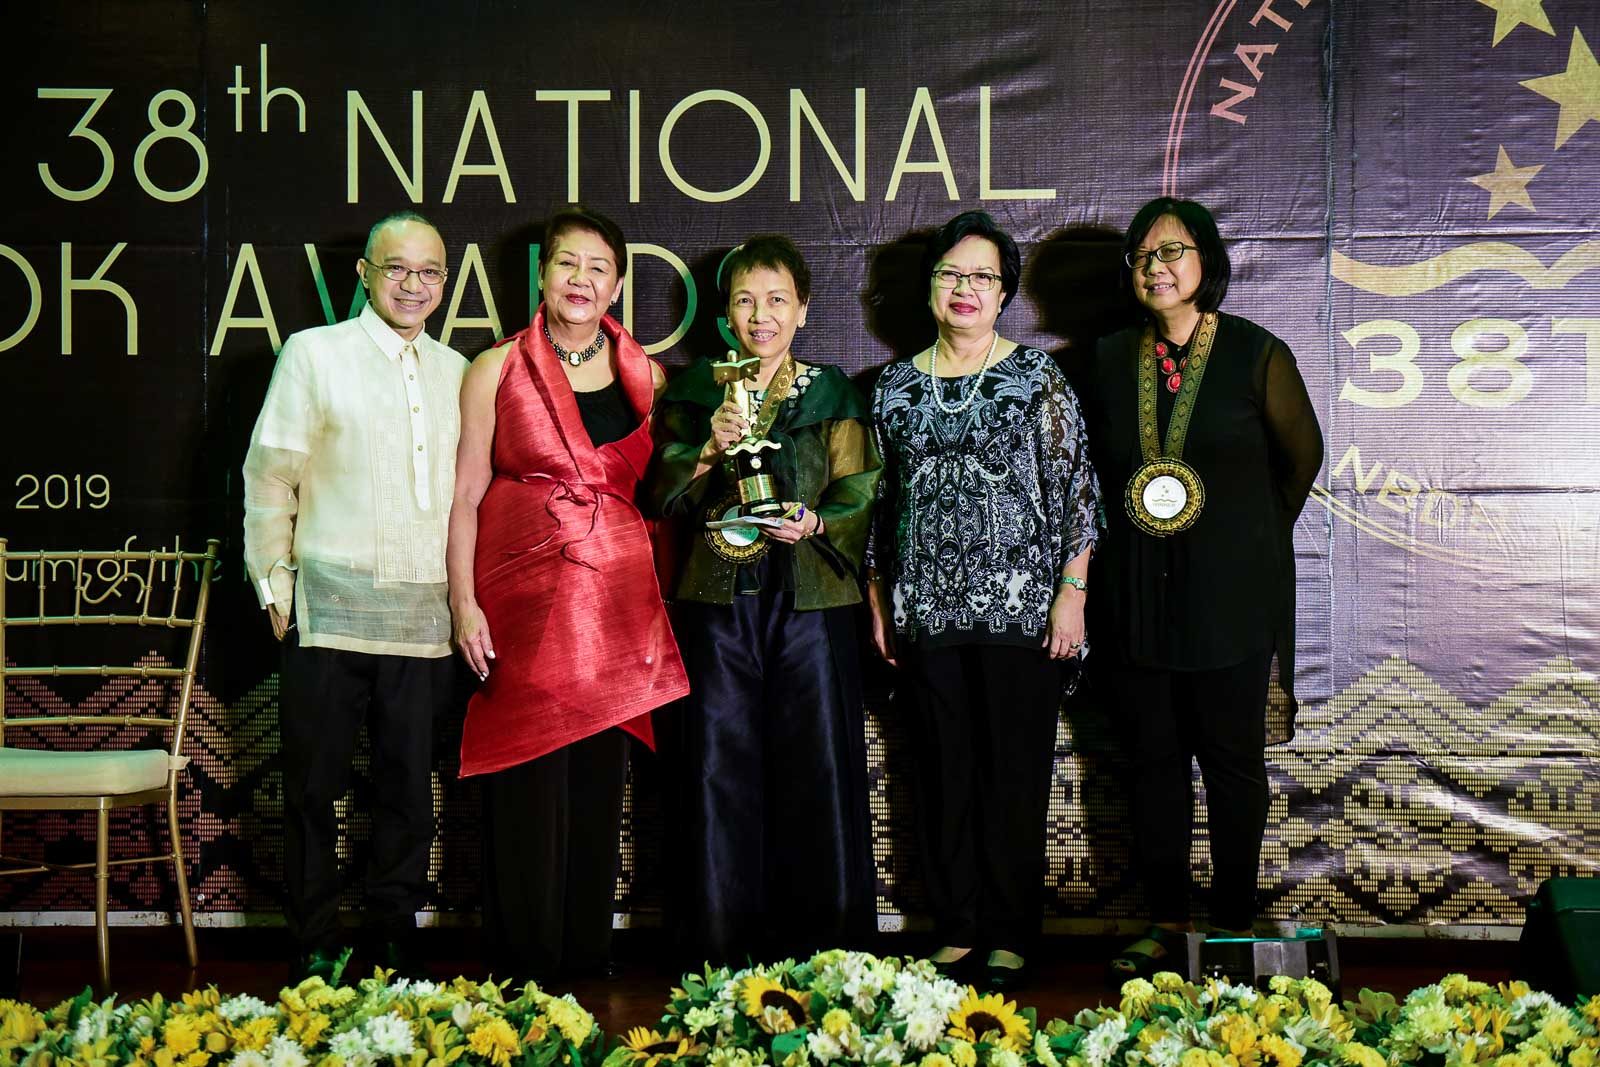 IN PHOTOS: 38th National Book Awards ceremony